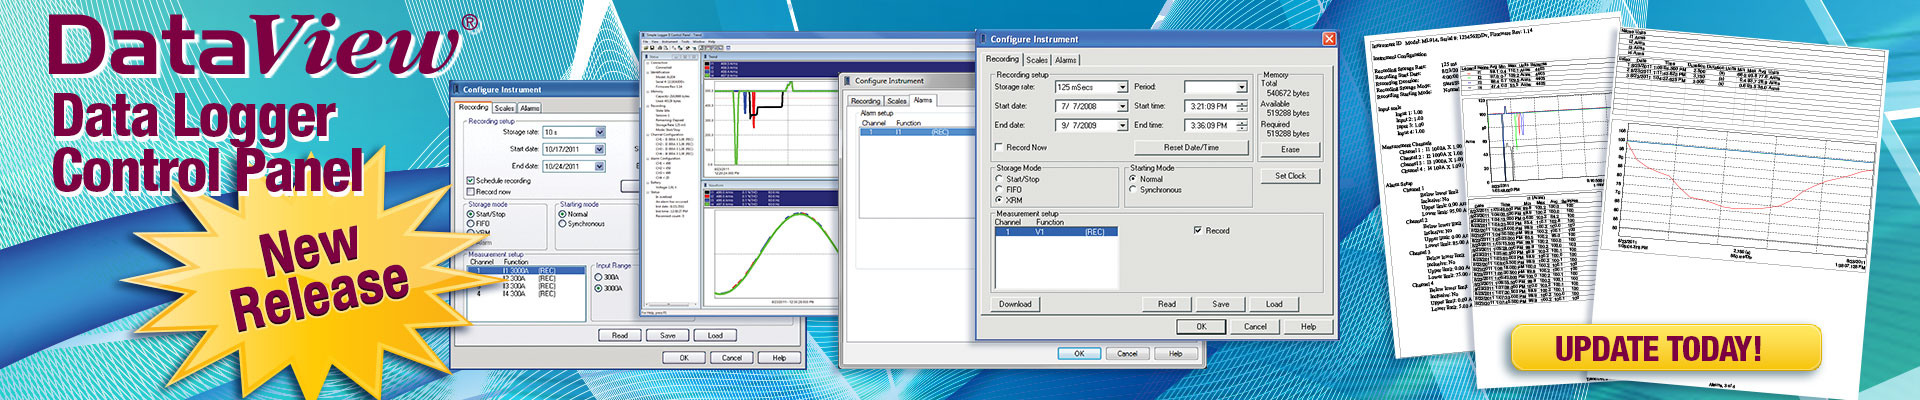 We have released a new version of the Data Logger Control Panel 2.02.0293.